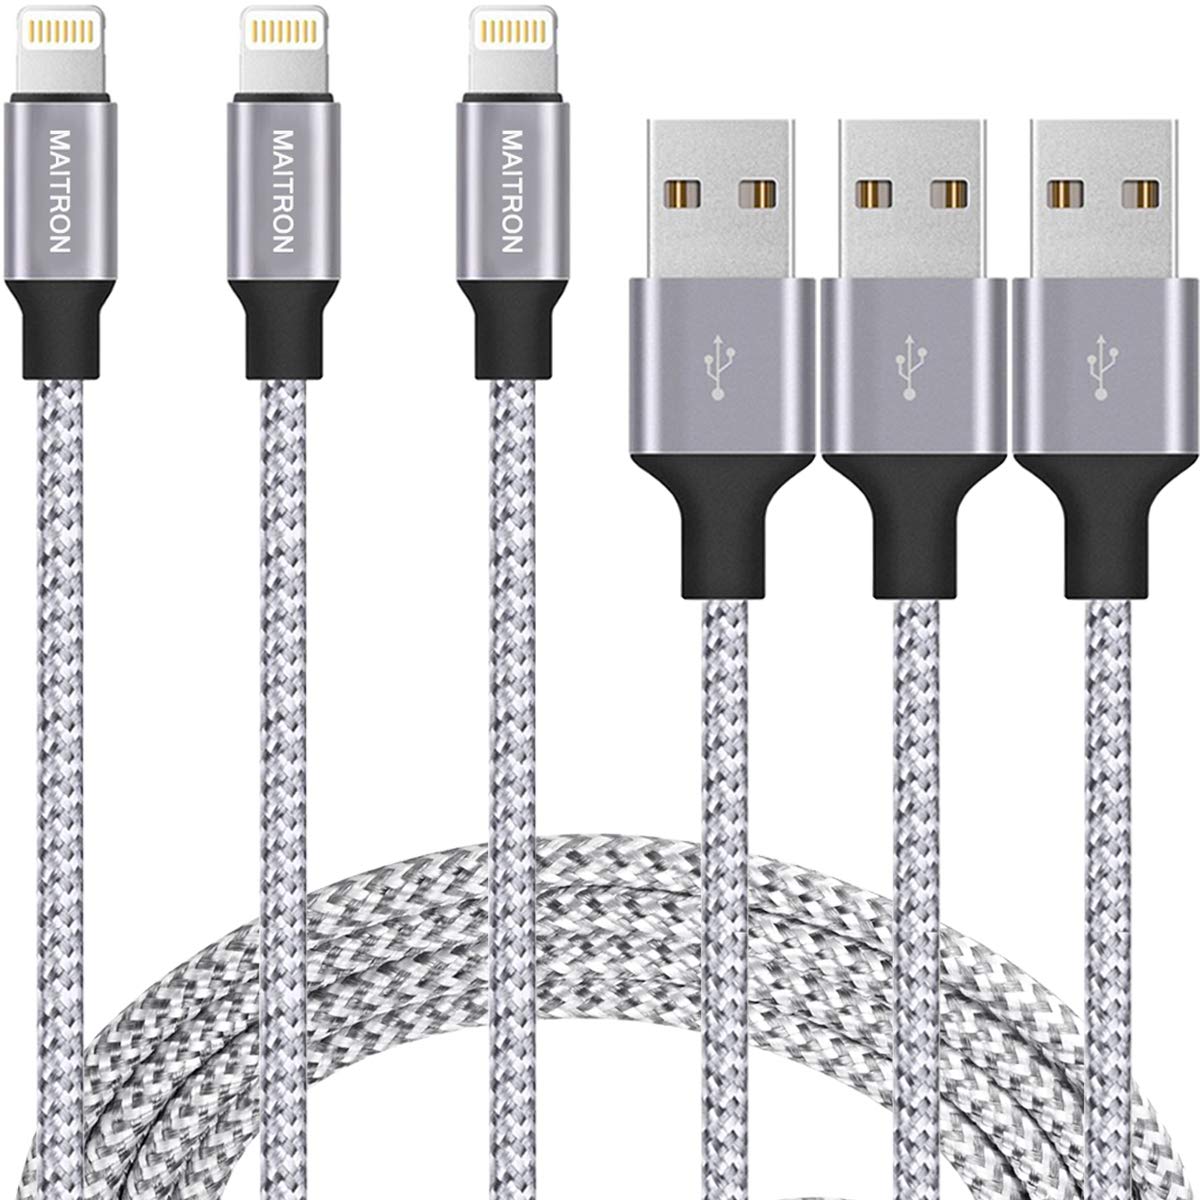 Grayish White MFi Certified Lightning Cable 5 Pack 3/3/6/6/10FT WUYA iPhone Charger Nylon Woven with Metal Connector Compatible iPhone Xs Max/X/8/7/Plus/6S/6/SE/5S iPad 